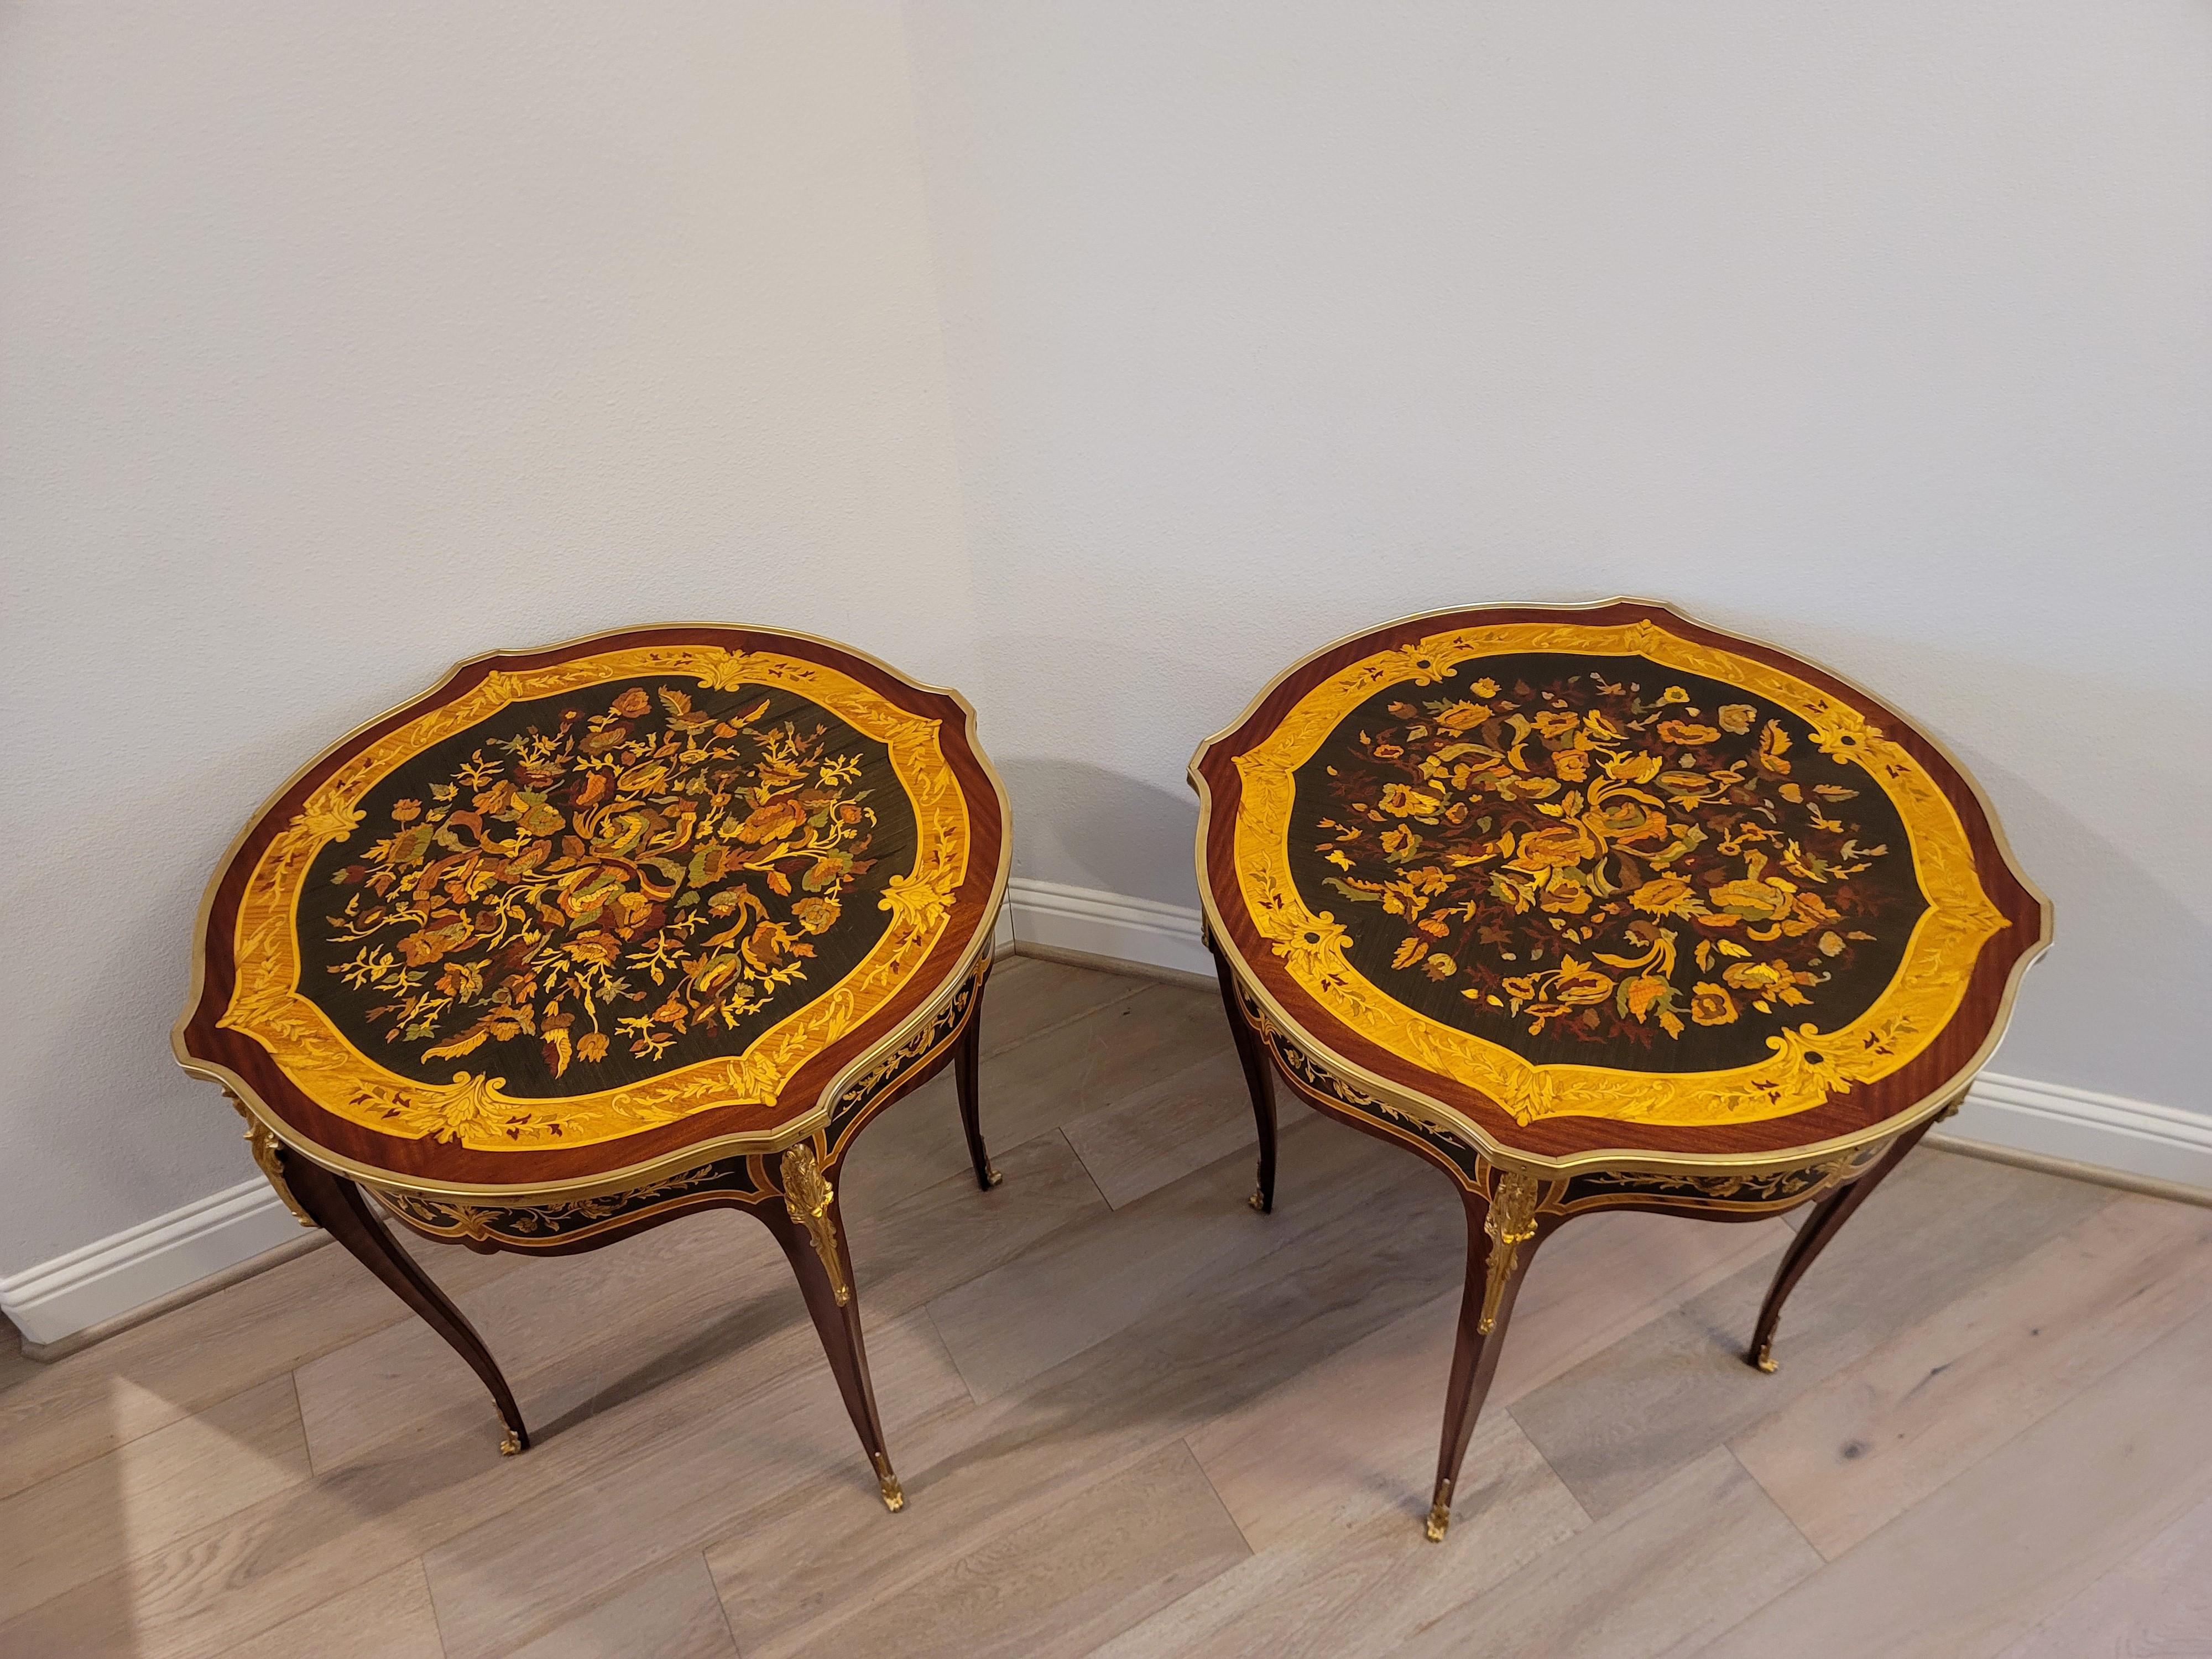 Fine Pair French Louis XV Style Gilt Bronze Mounted Floral Marquetry Side Tables In Good Condition For Sale In Forney, TX